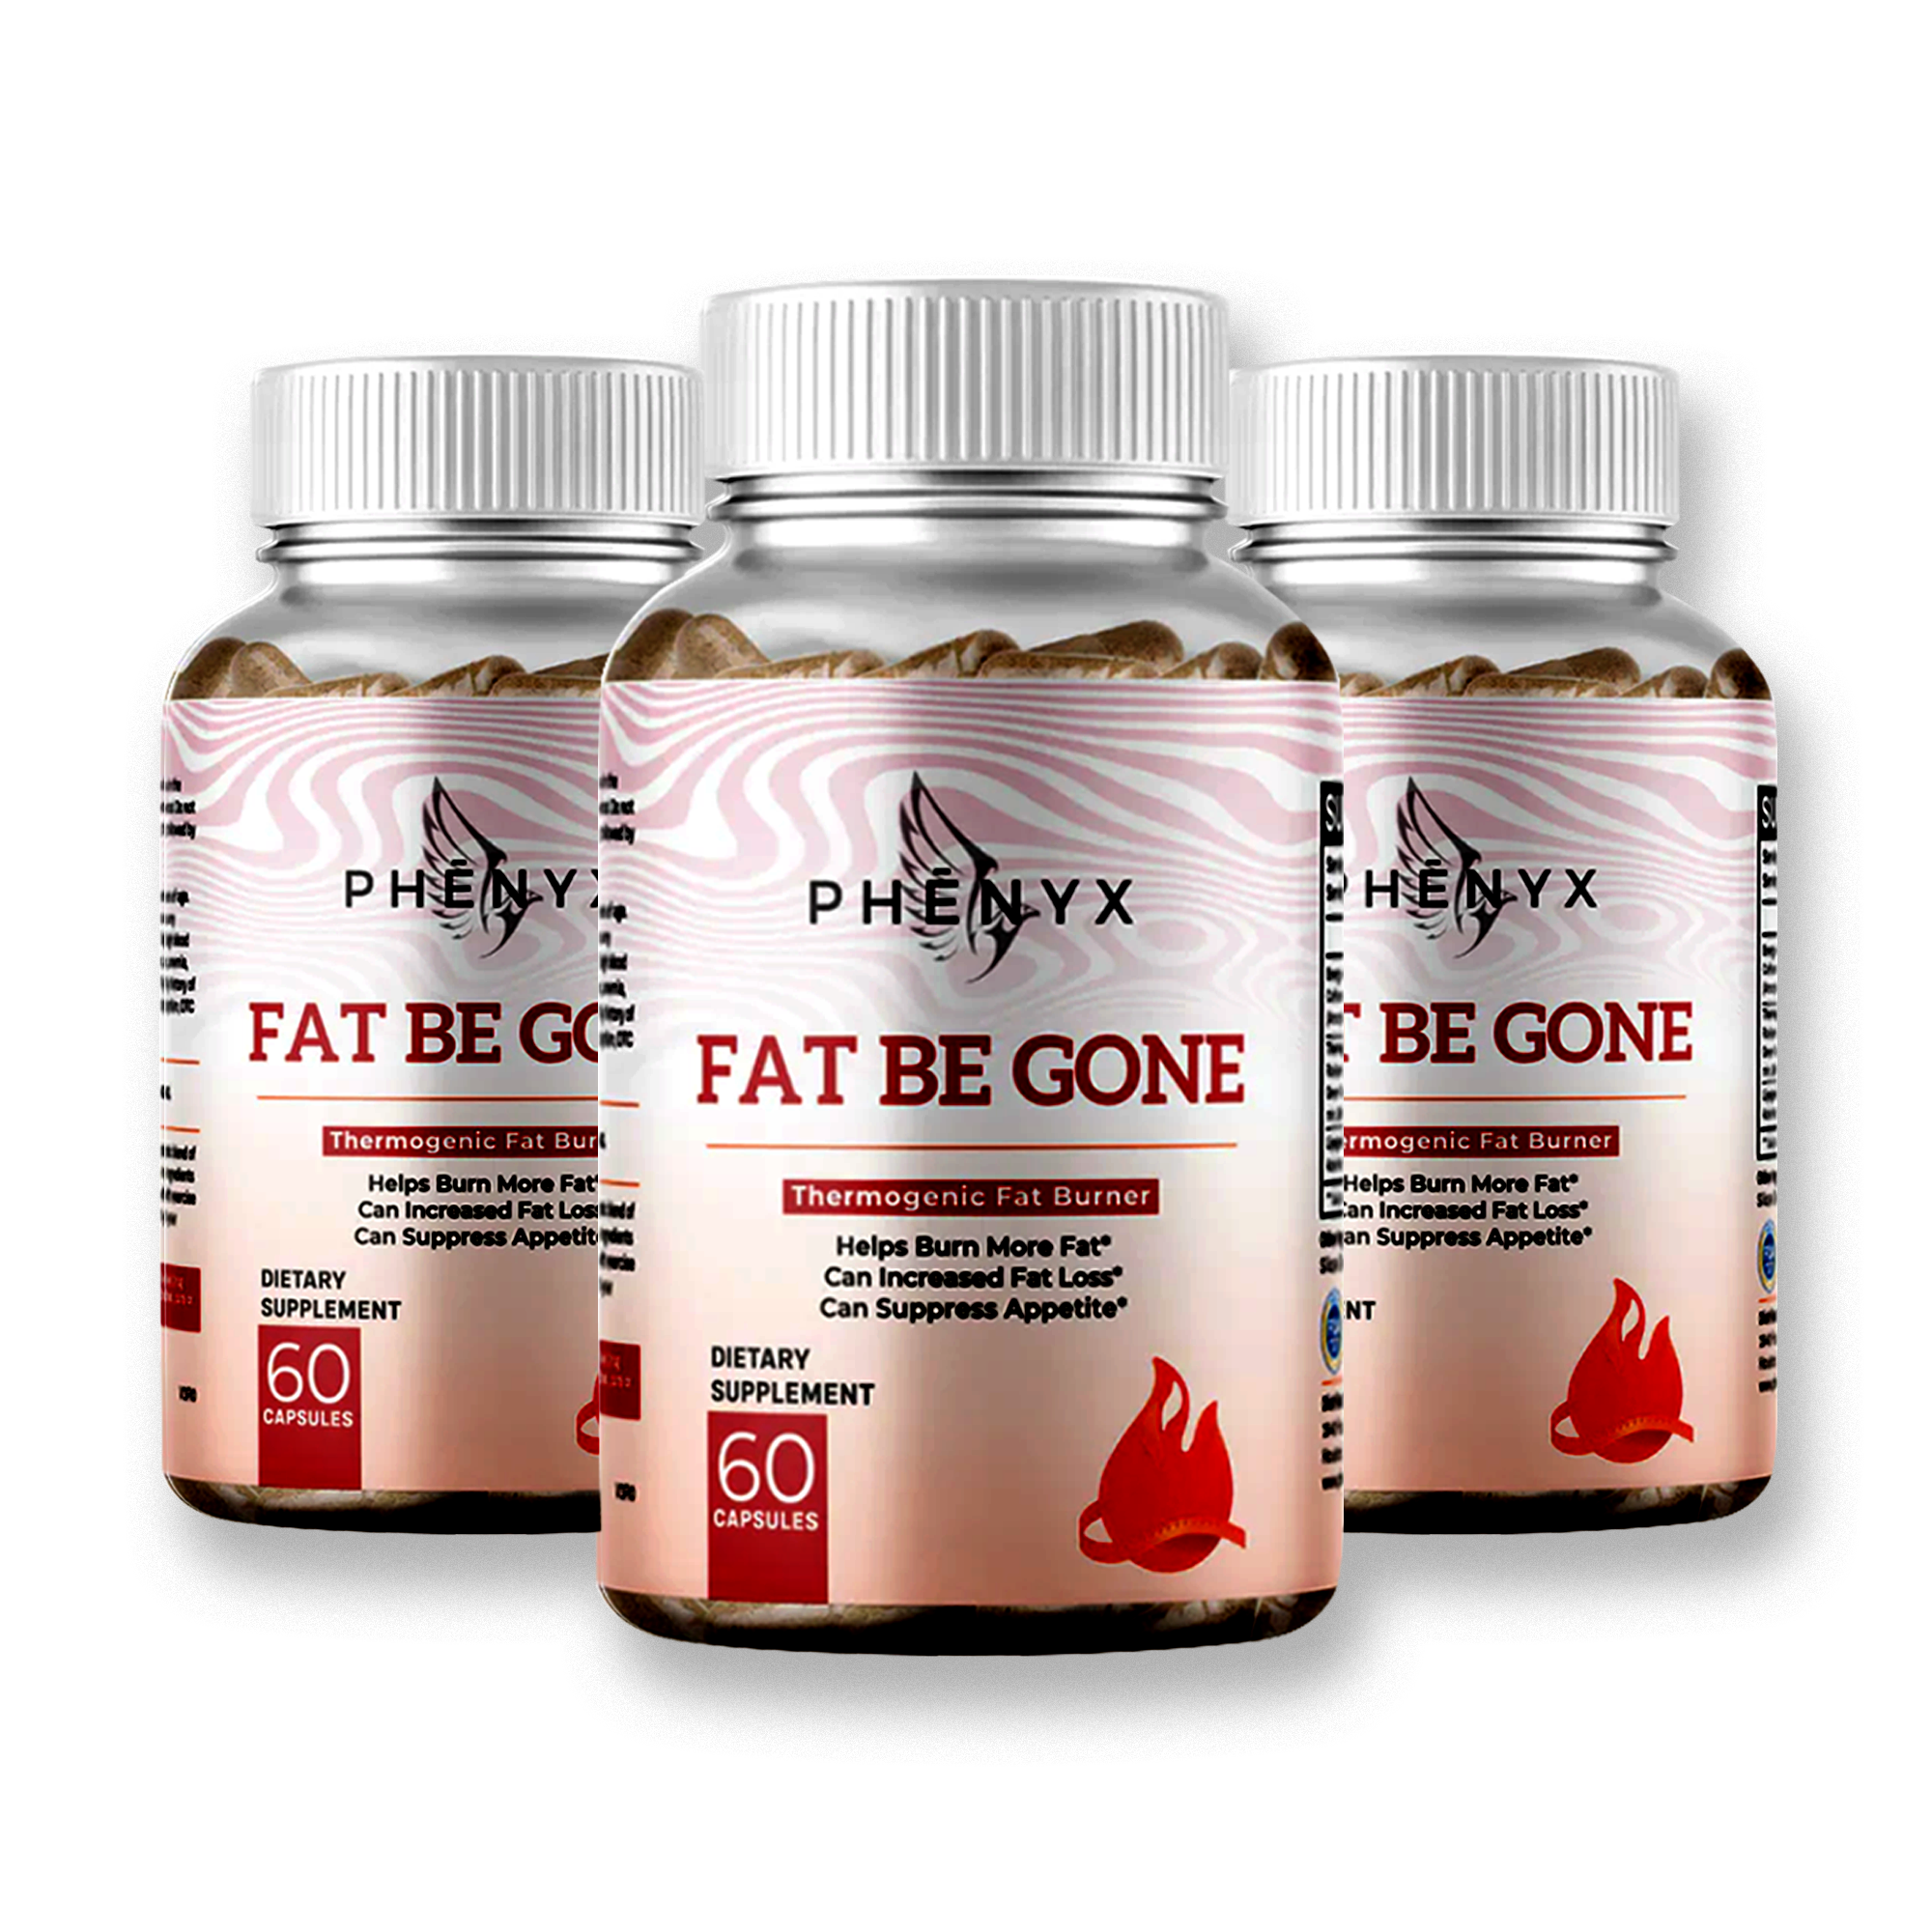 Fat Be Gone